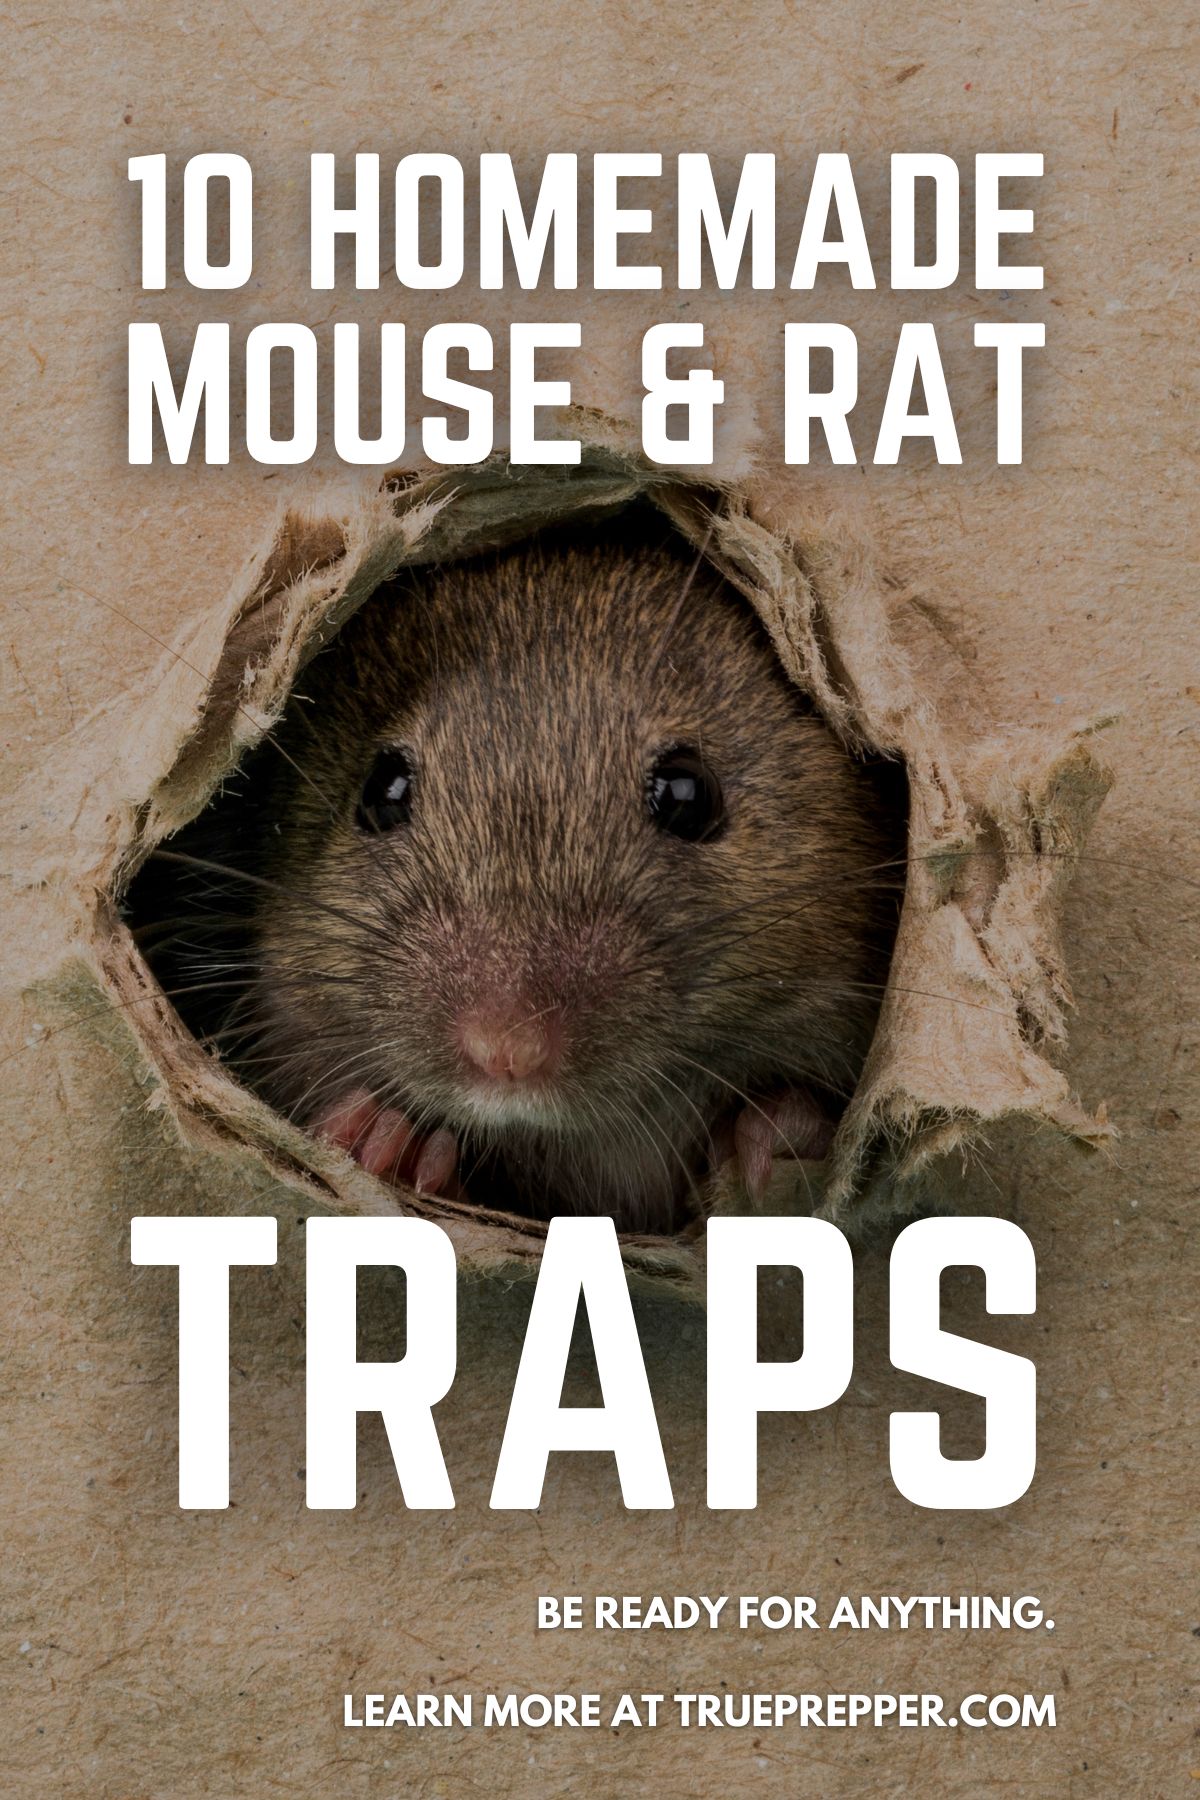 Non Lethal Homemade Mouse Trap : 7 Steps - Instructables